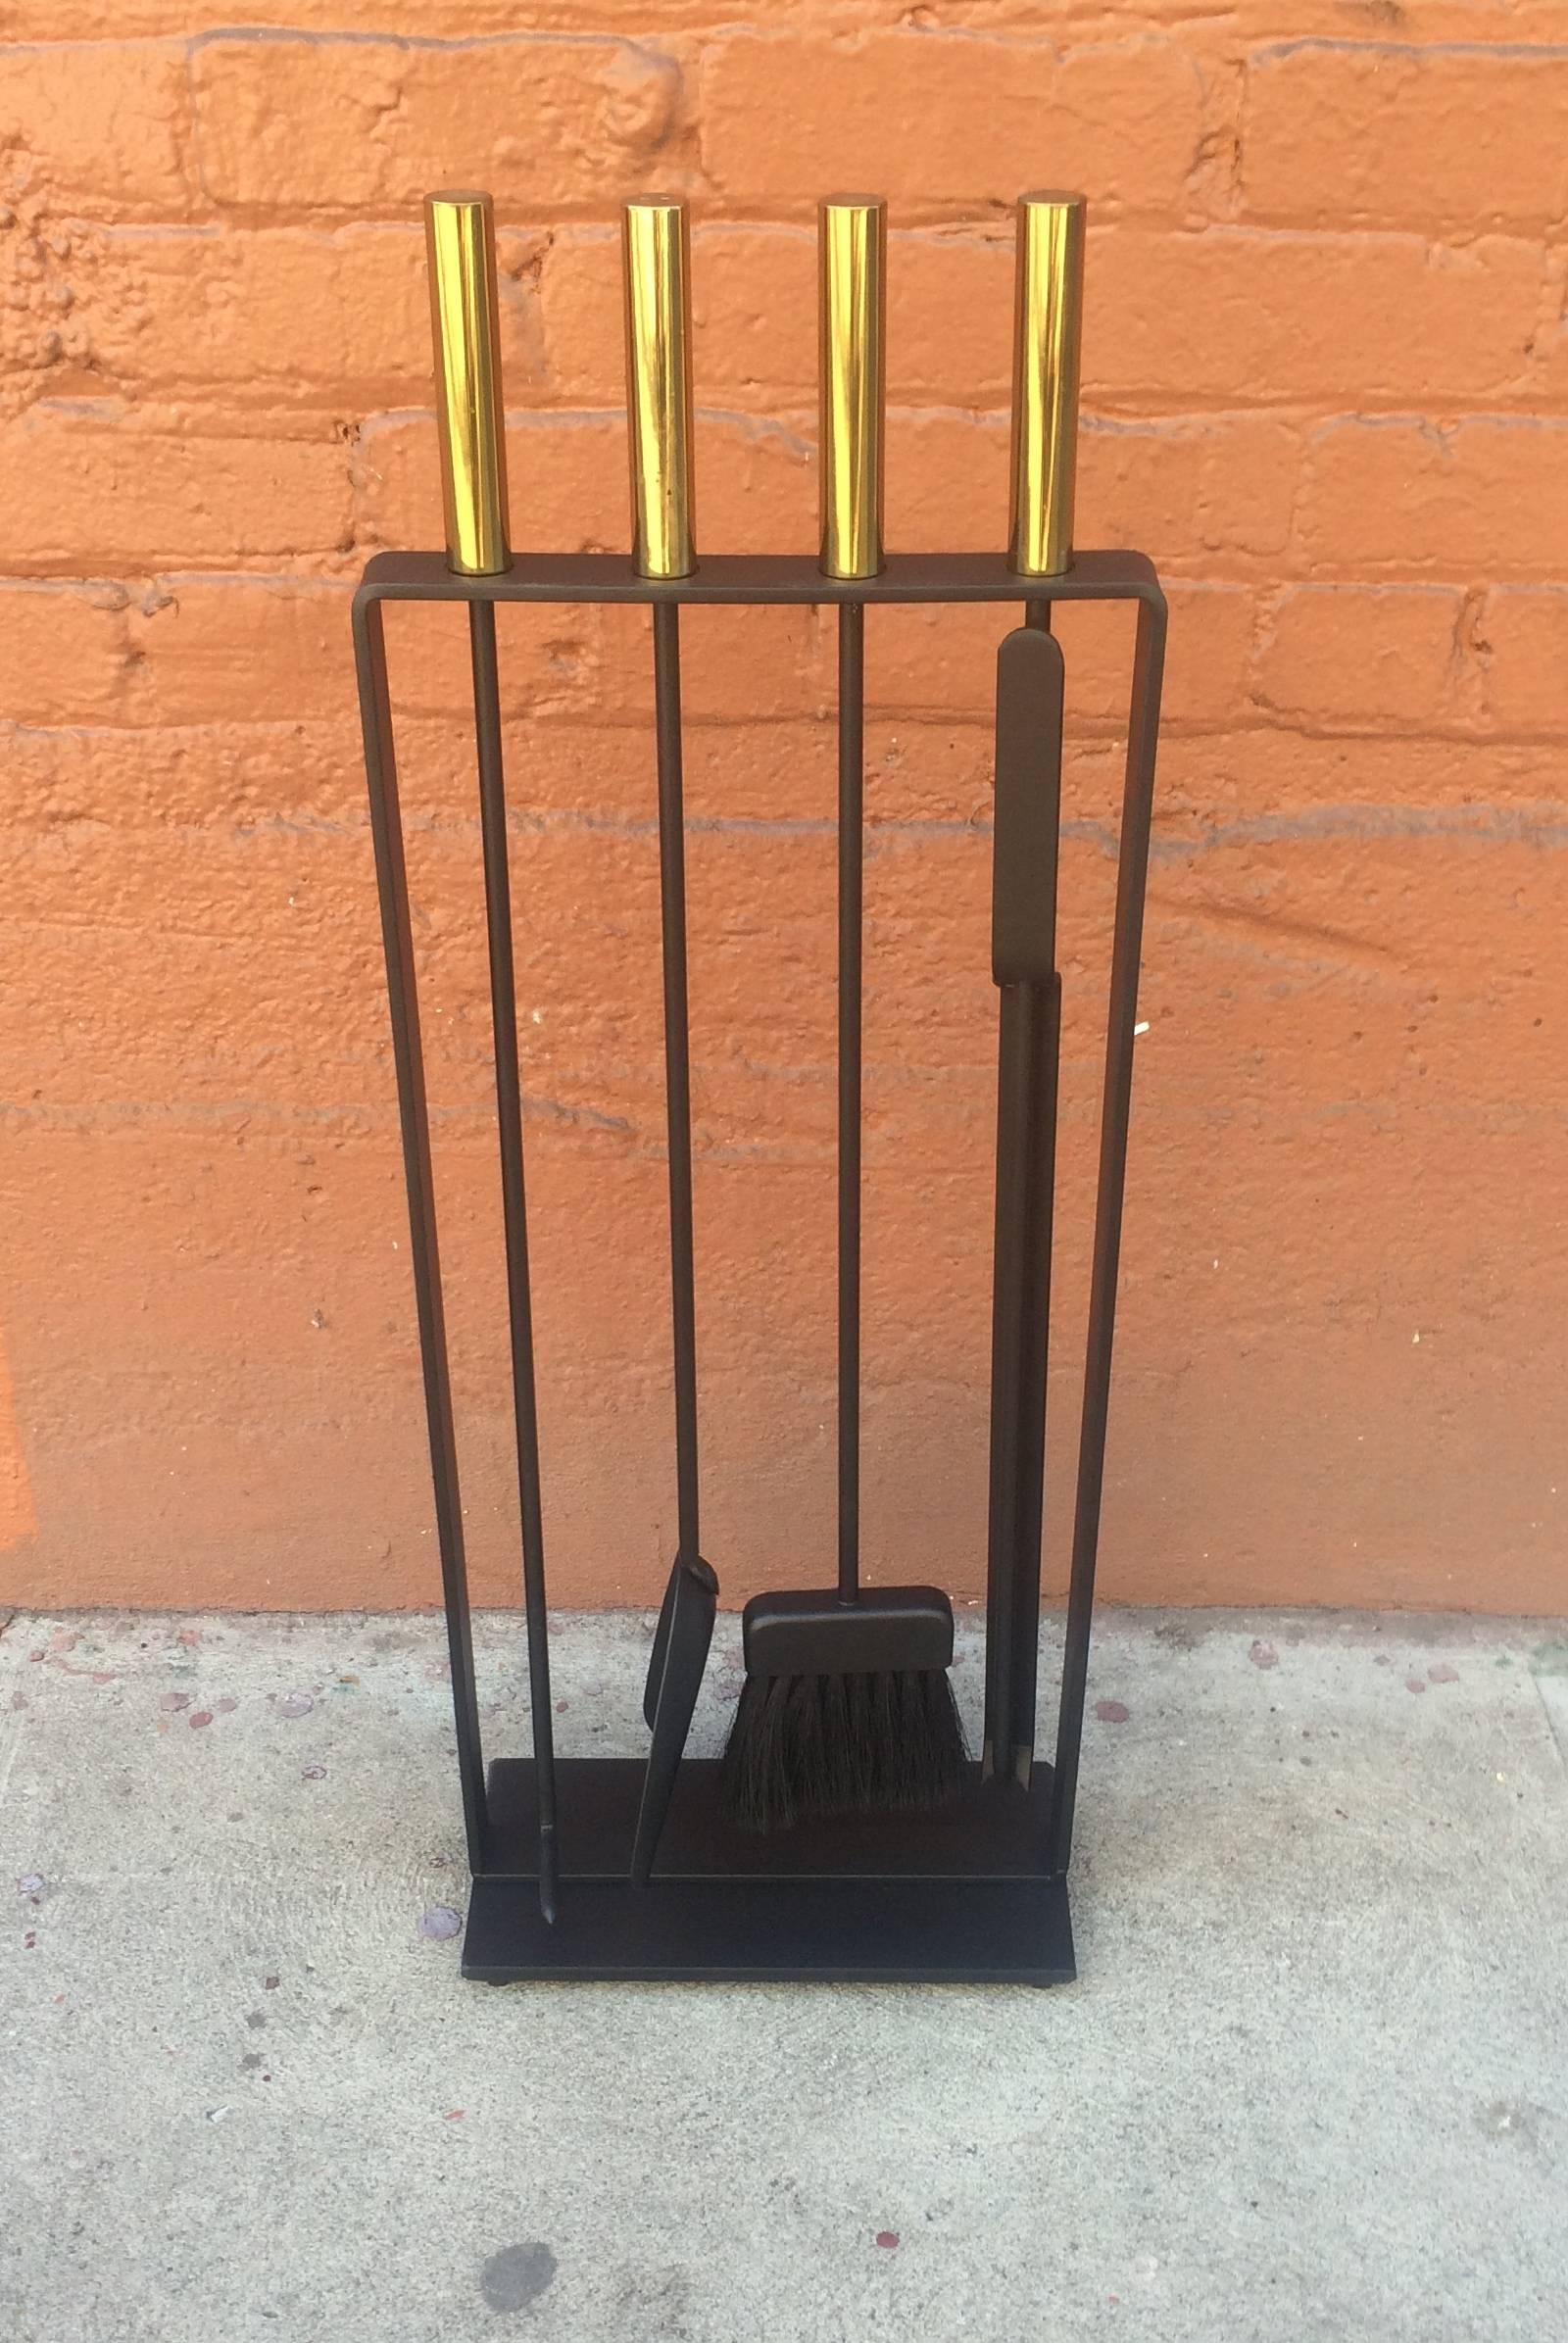 Fireplace tools by Pilgrim with solid brass handles, consisting of a poker, brush, pan and tongs, newly sprayed in a flat black.